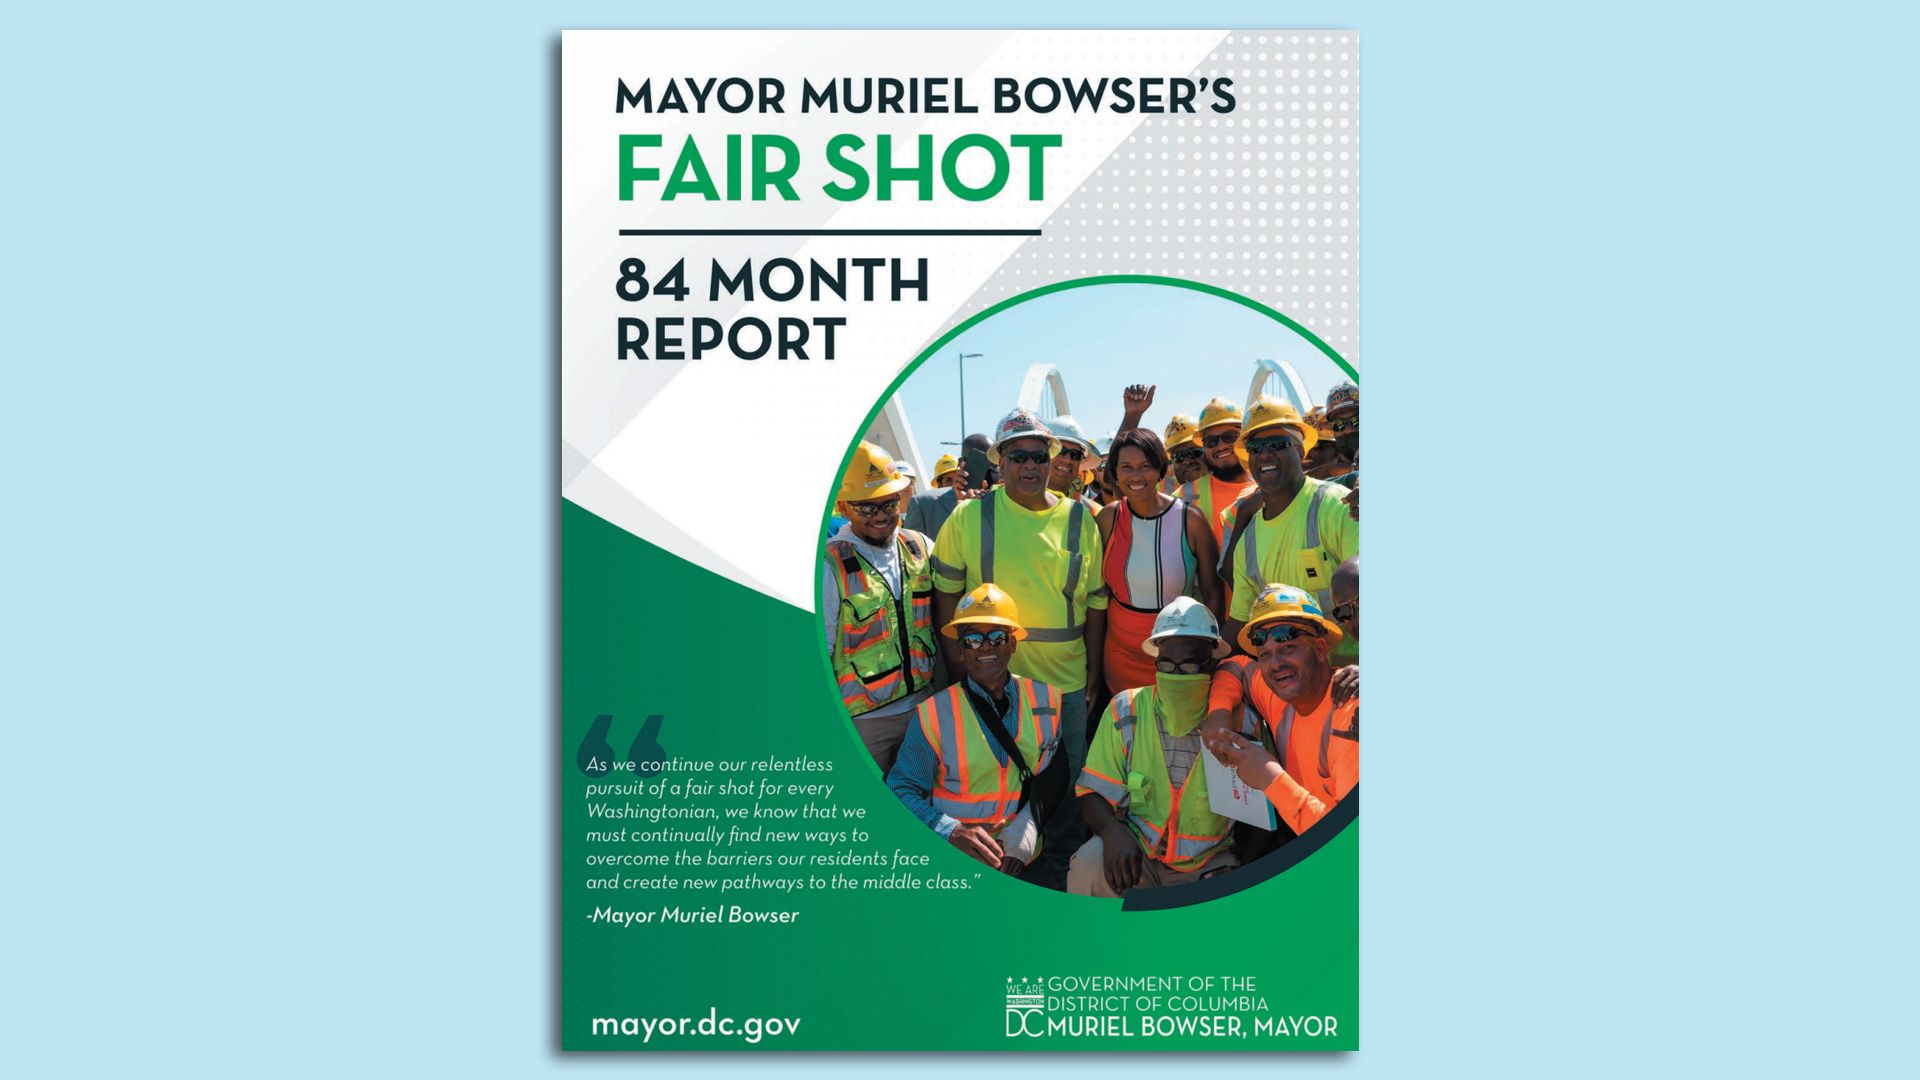 An image of Mayor Muriel Bowser's "84 month report" cover